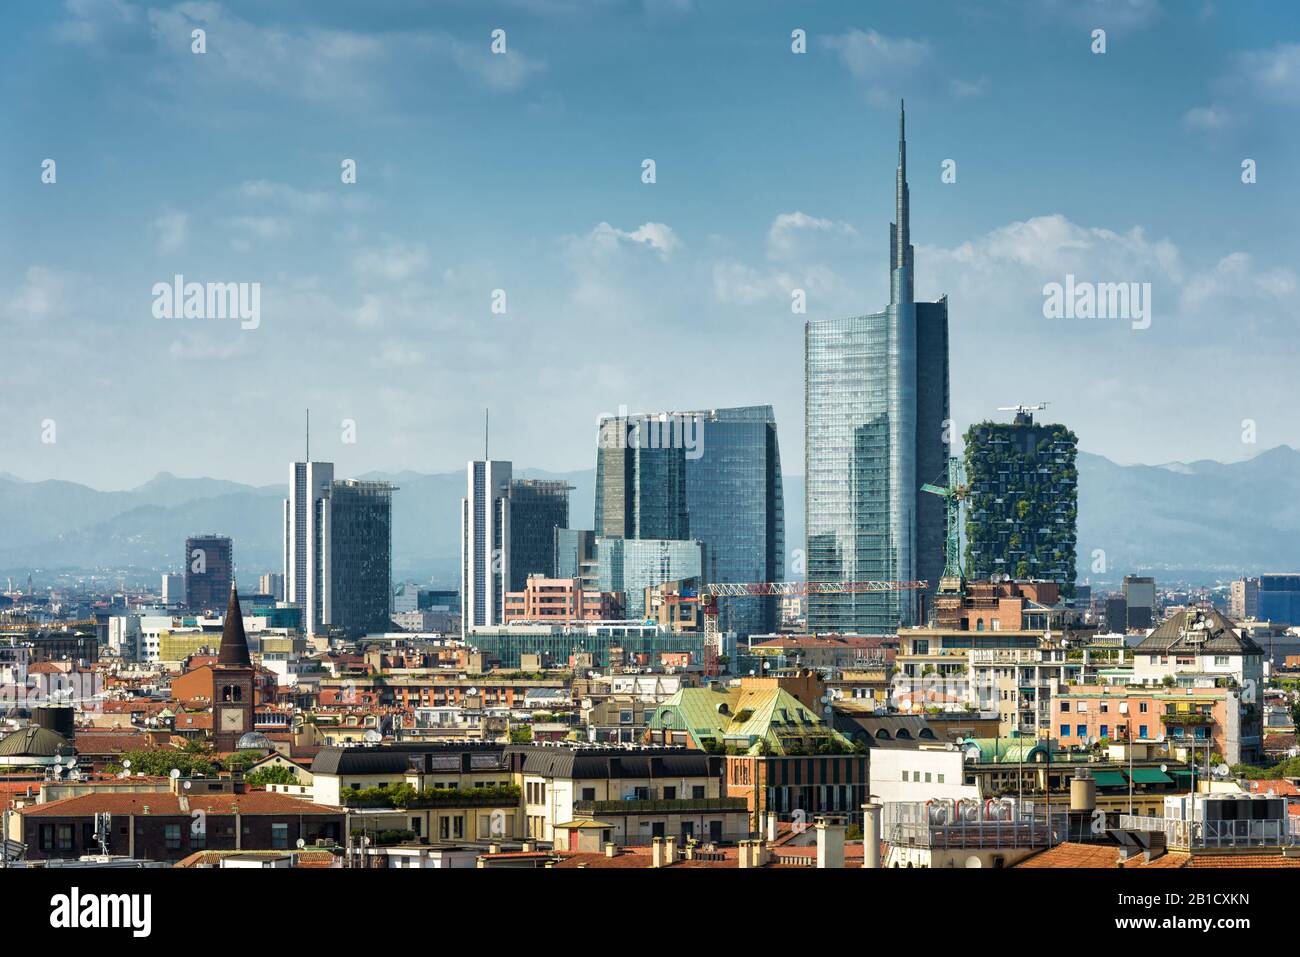 Milan skyline with modern skyscrapers in Porto Nuovo business district in Italy Stock Photo